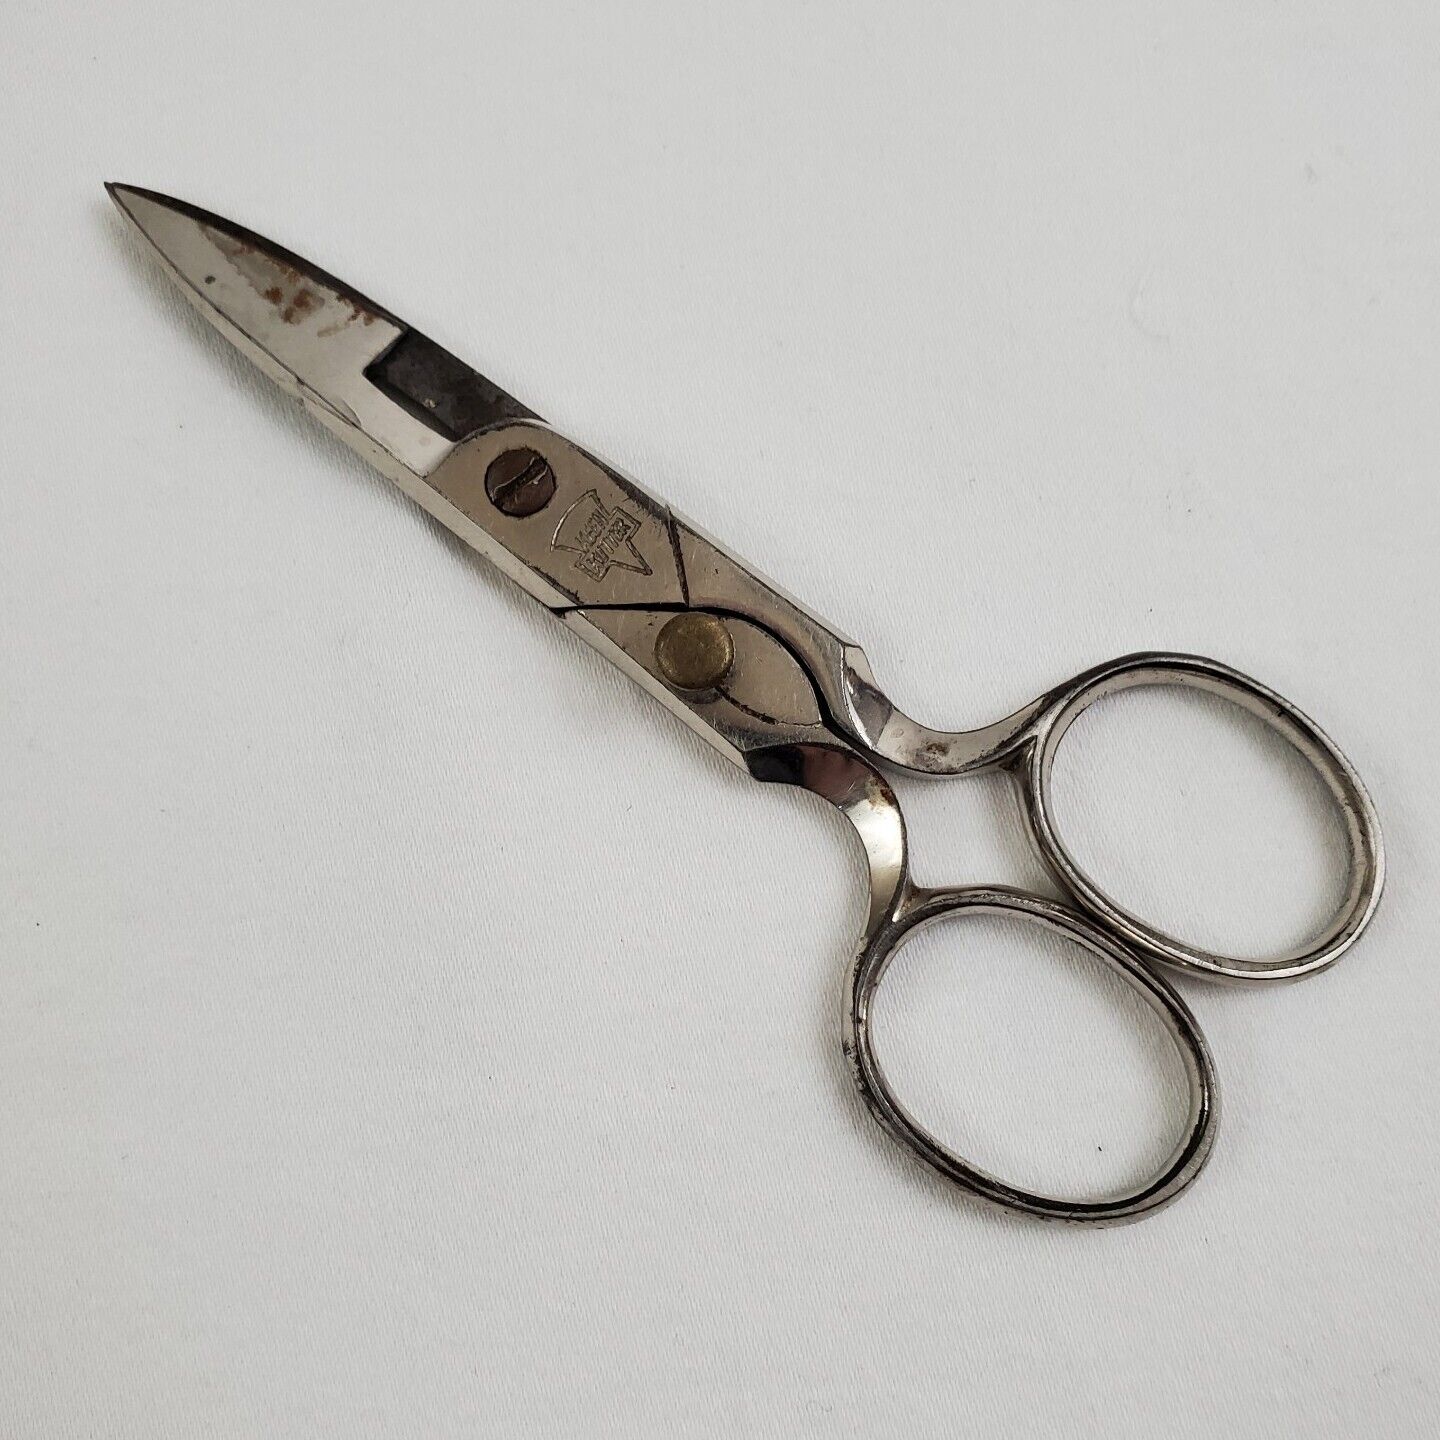 Vintage Buttonhole Sewing Scissors Shears Keen Kutter Simmons HDW Co Germany